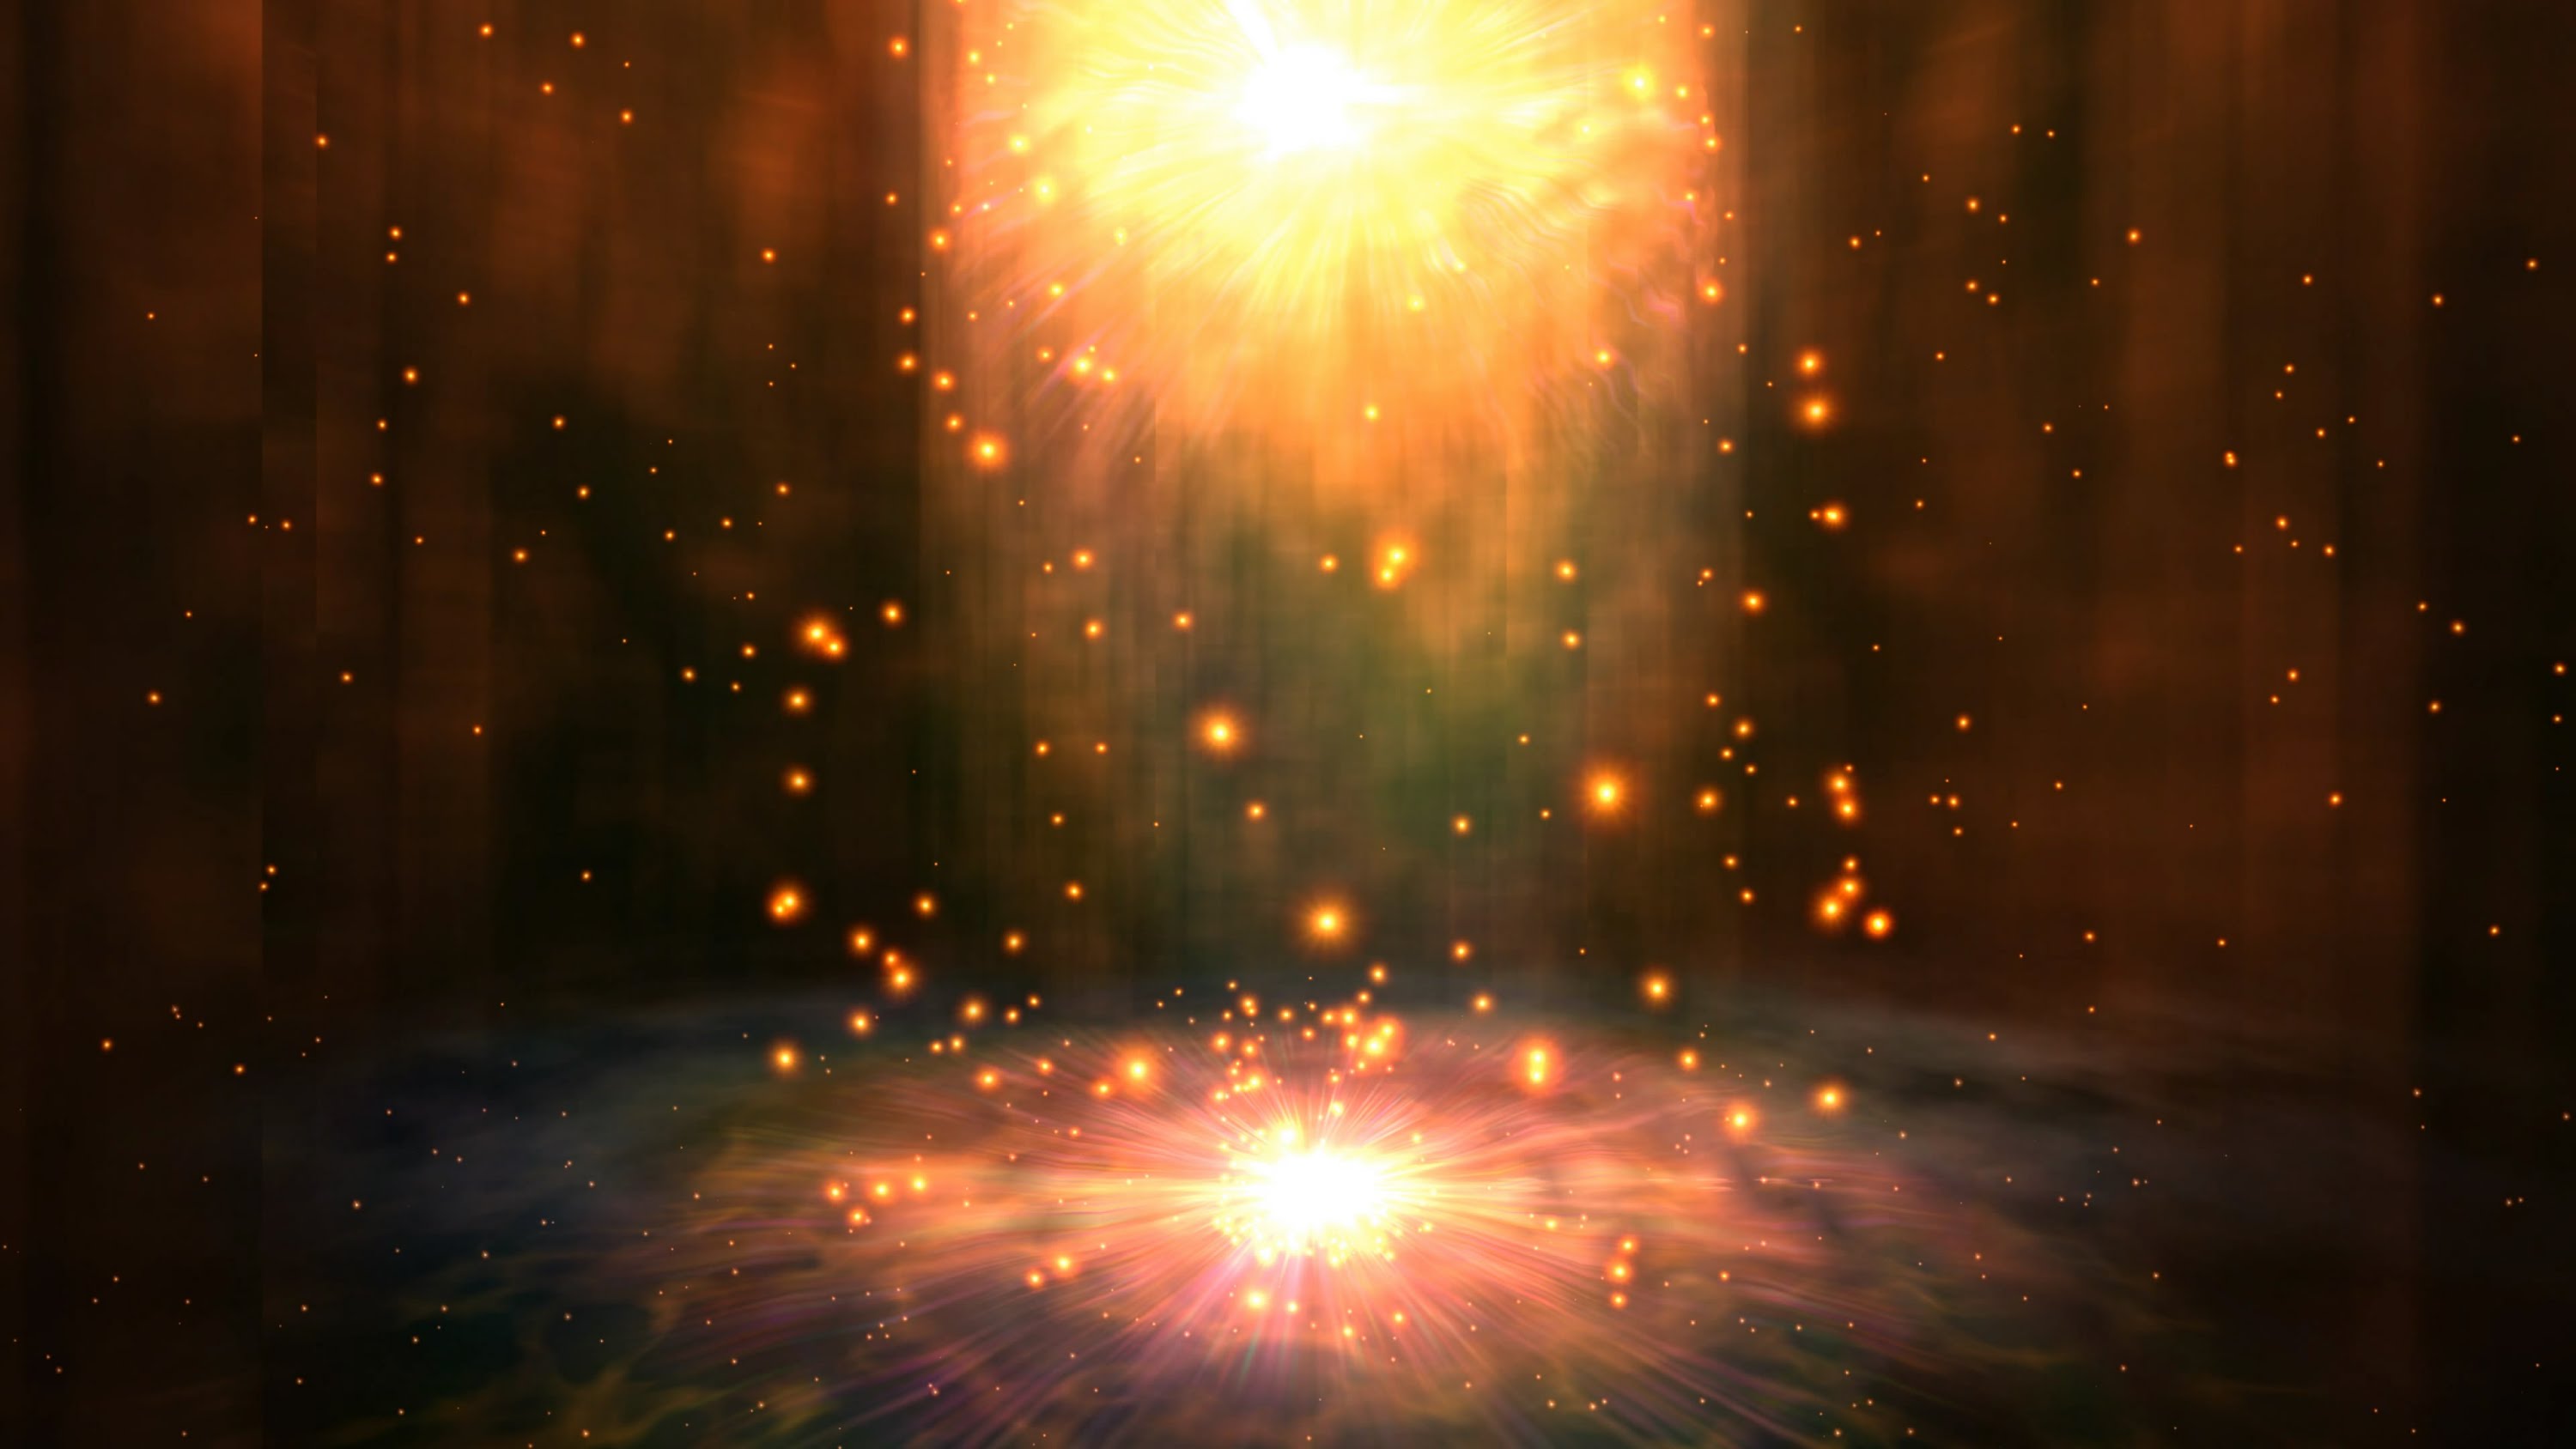 4K Magical Ground 2160p Beautiful Animated Wallpaper HD Background 3000x1688